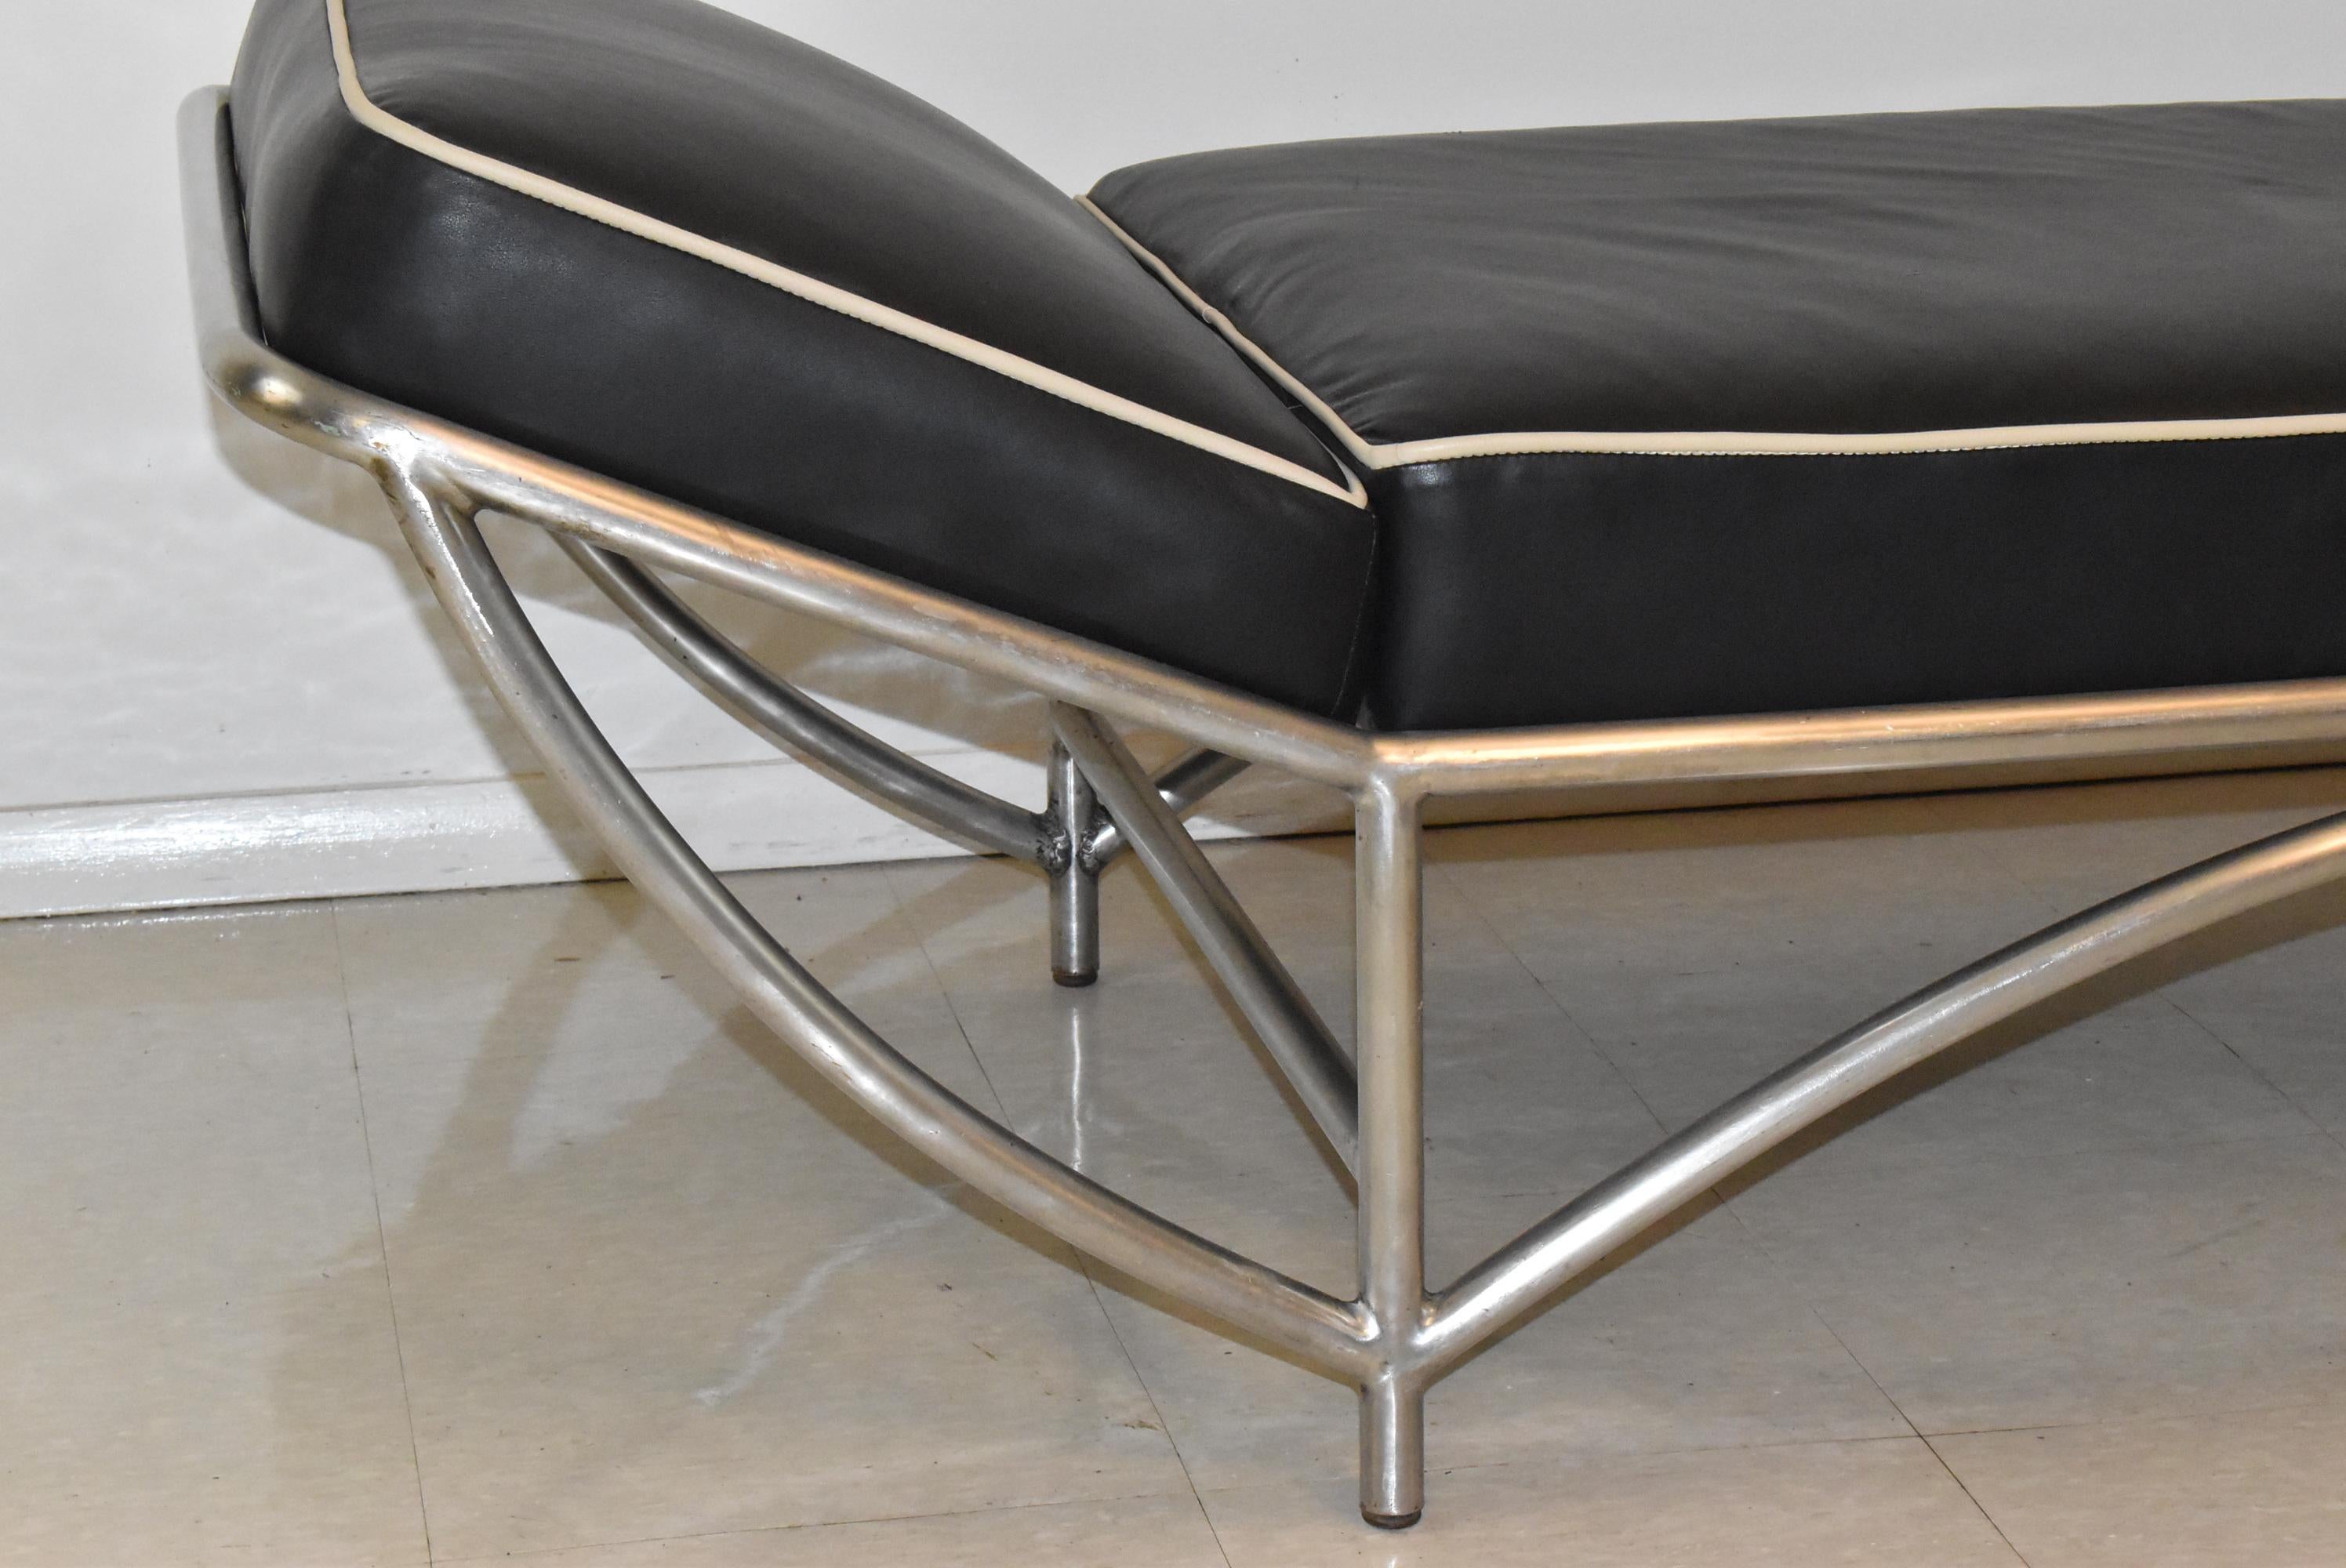 Haywood Wakefield Art Deco tubular steel frame chaise lounge / daybed. Very nice condition. Dimensions:  73